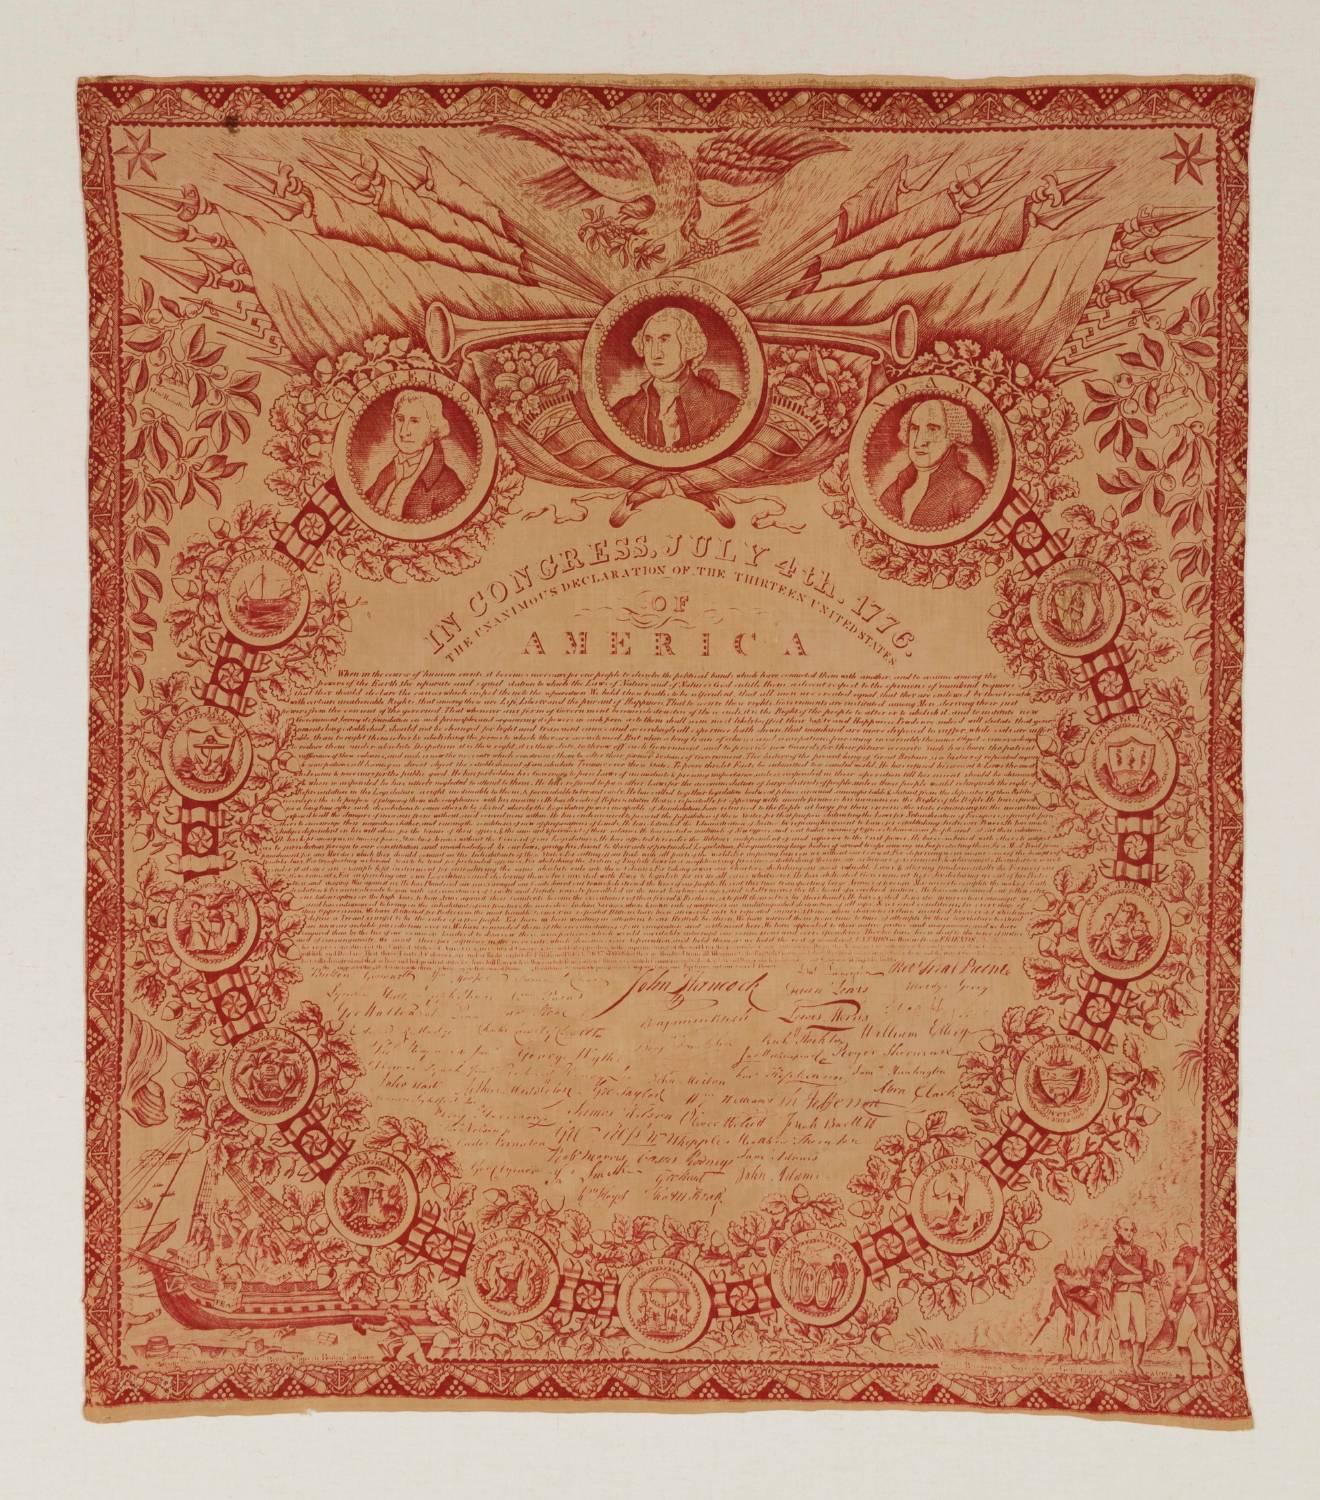 Exceptional 1821 printing of the declaration of independence on cloth, produced and distributed by Robert & Collin Gillespie:

Printed in mulberry ink on cotton, this kerchief-style broadside is one of the earliest known renditions of the